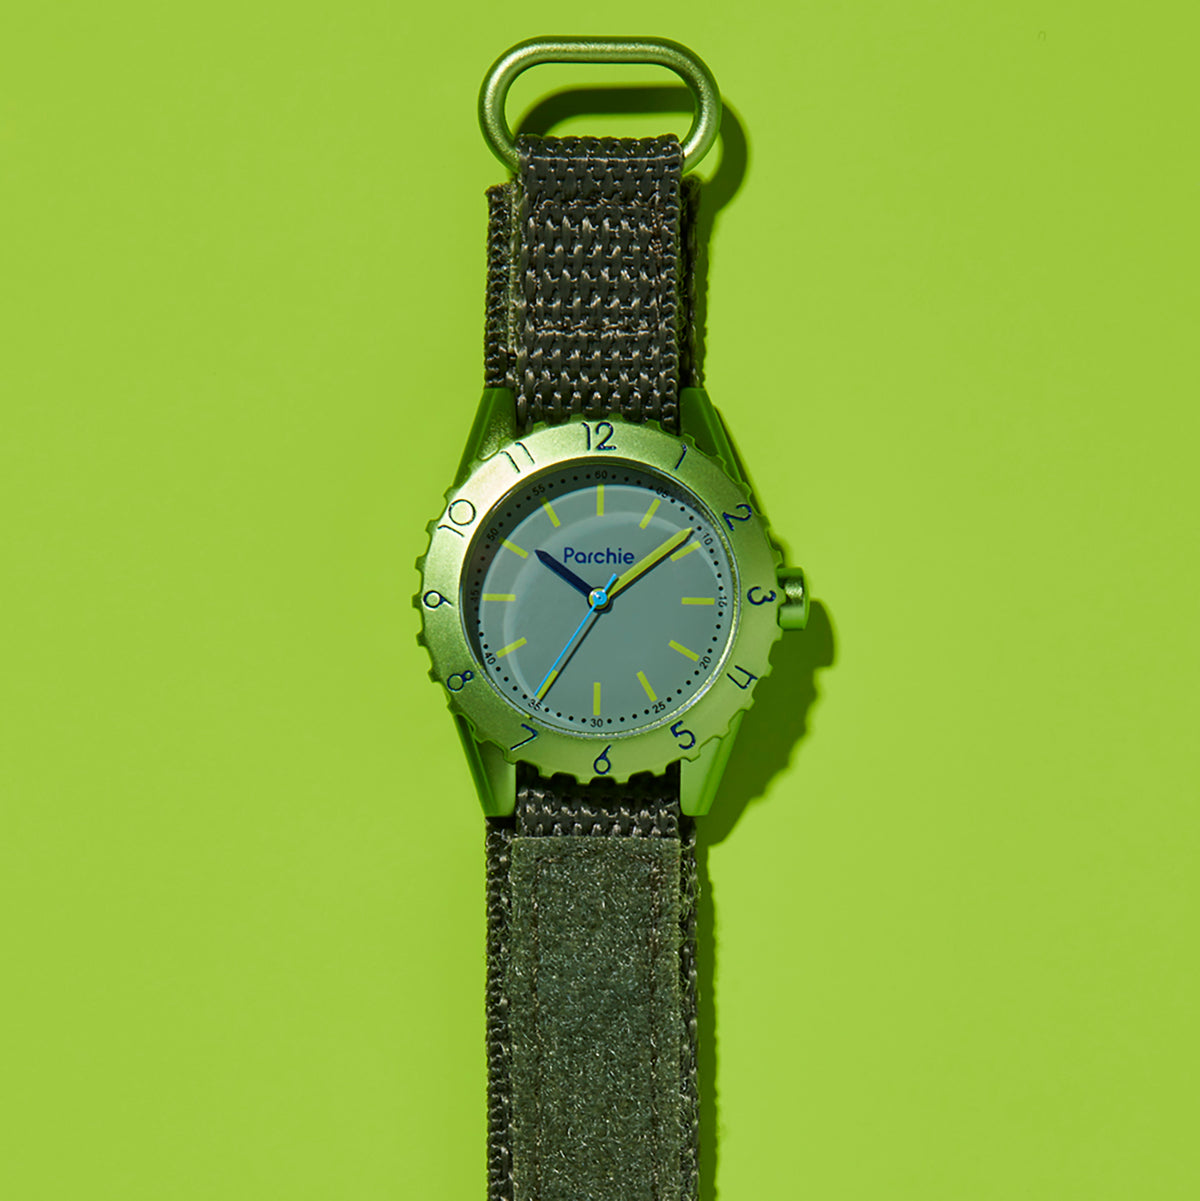 School-Time Parchie, Watches For Kids